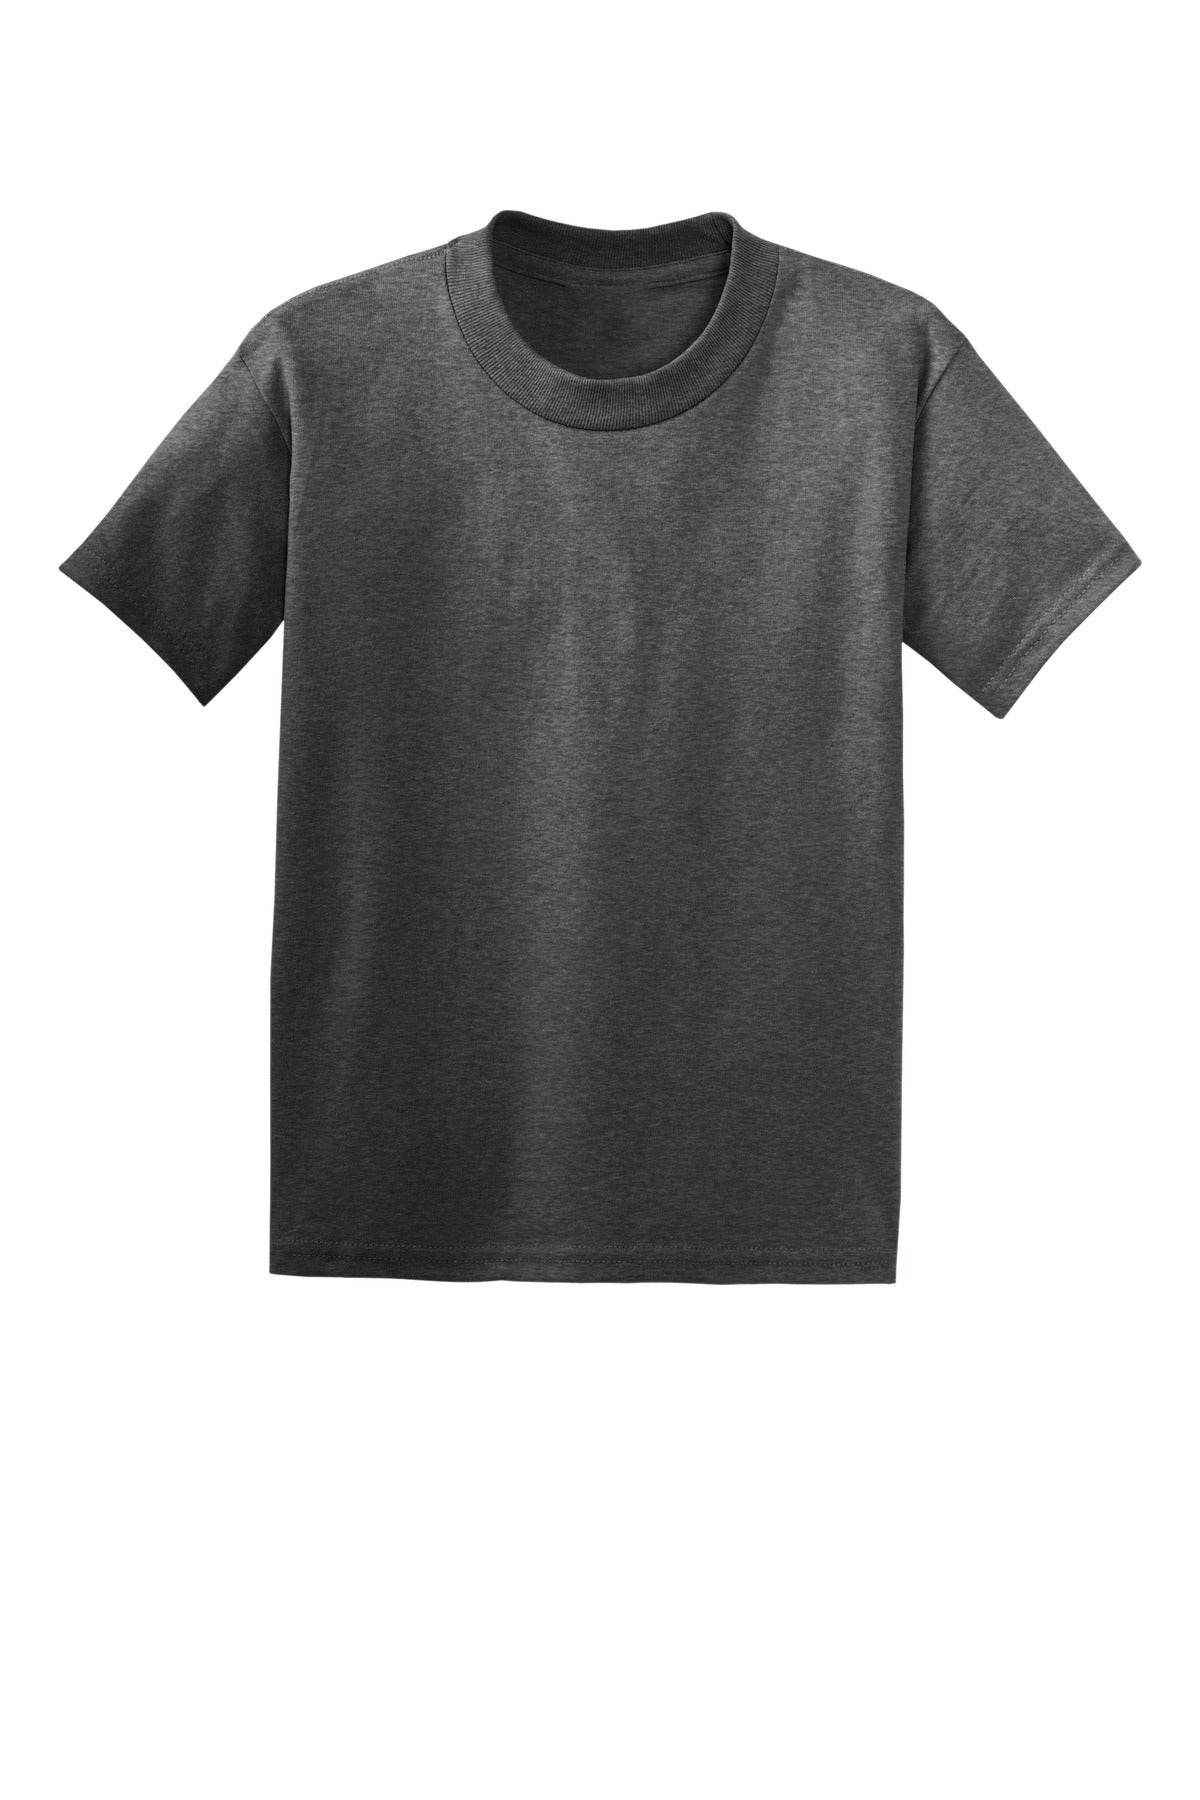 Hanes - Youth EcoSmart 50/50 Cotton/Poly T-Shirt. 5370